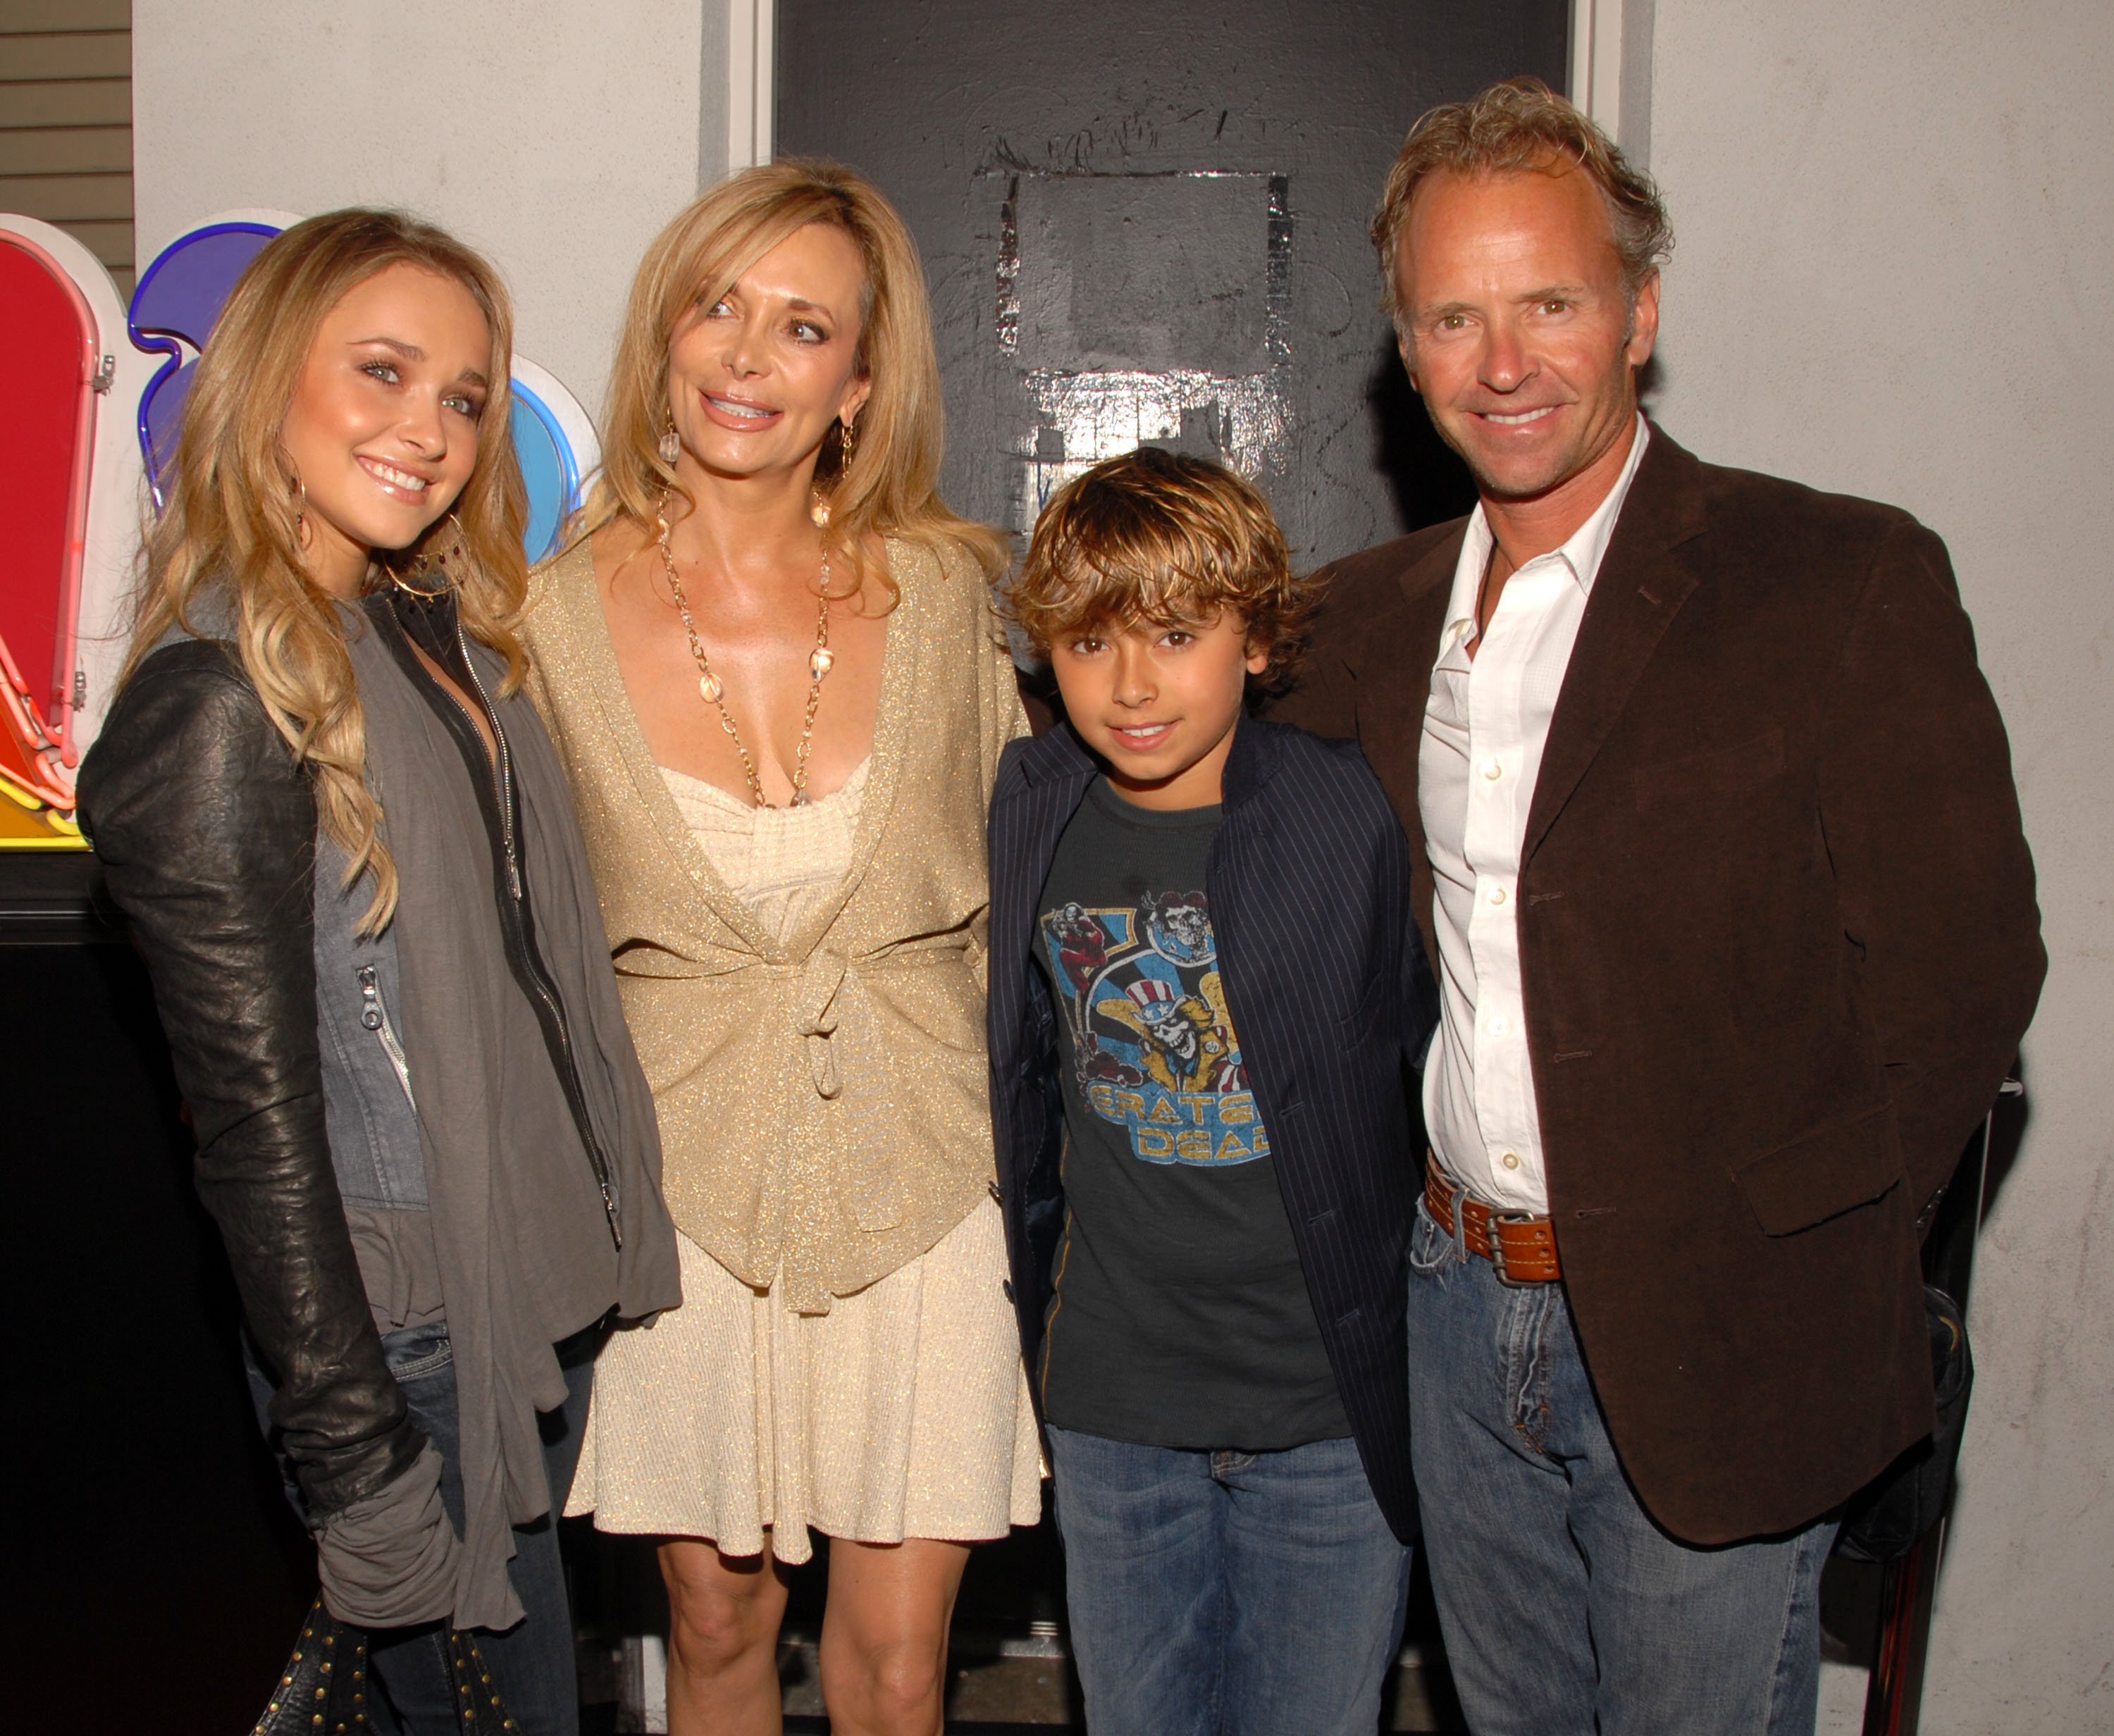 Hayden Panettiere, Leslie Panettiere, Jansen Panettiere and Skip Panettiere at the wrap party of NBC's "Heroes" on April 17, 2007. | Source: Getty Images